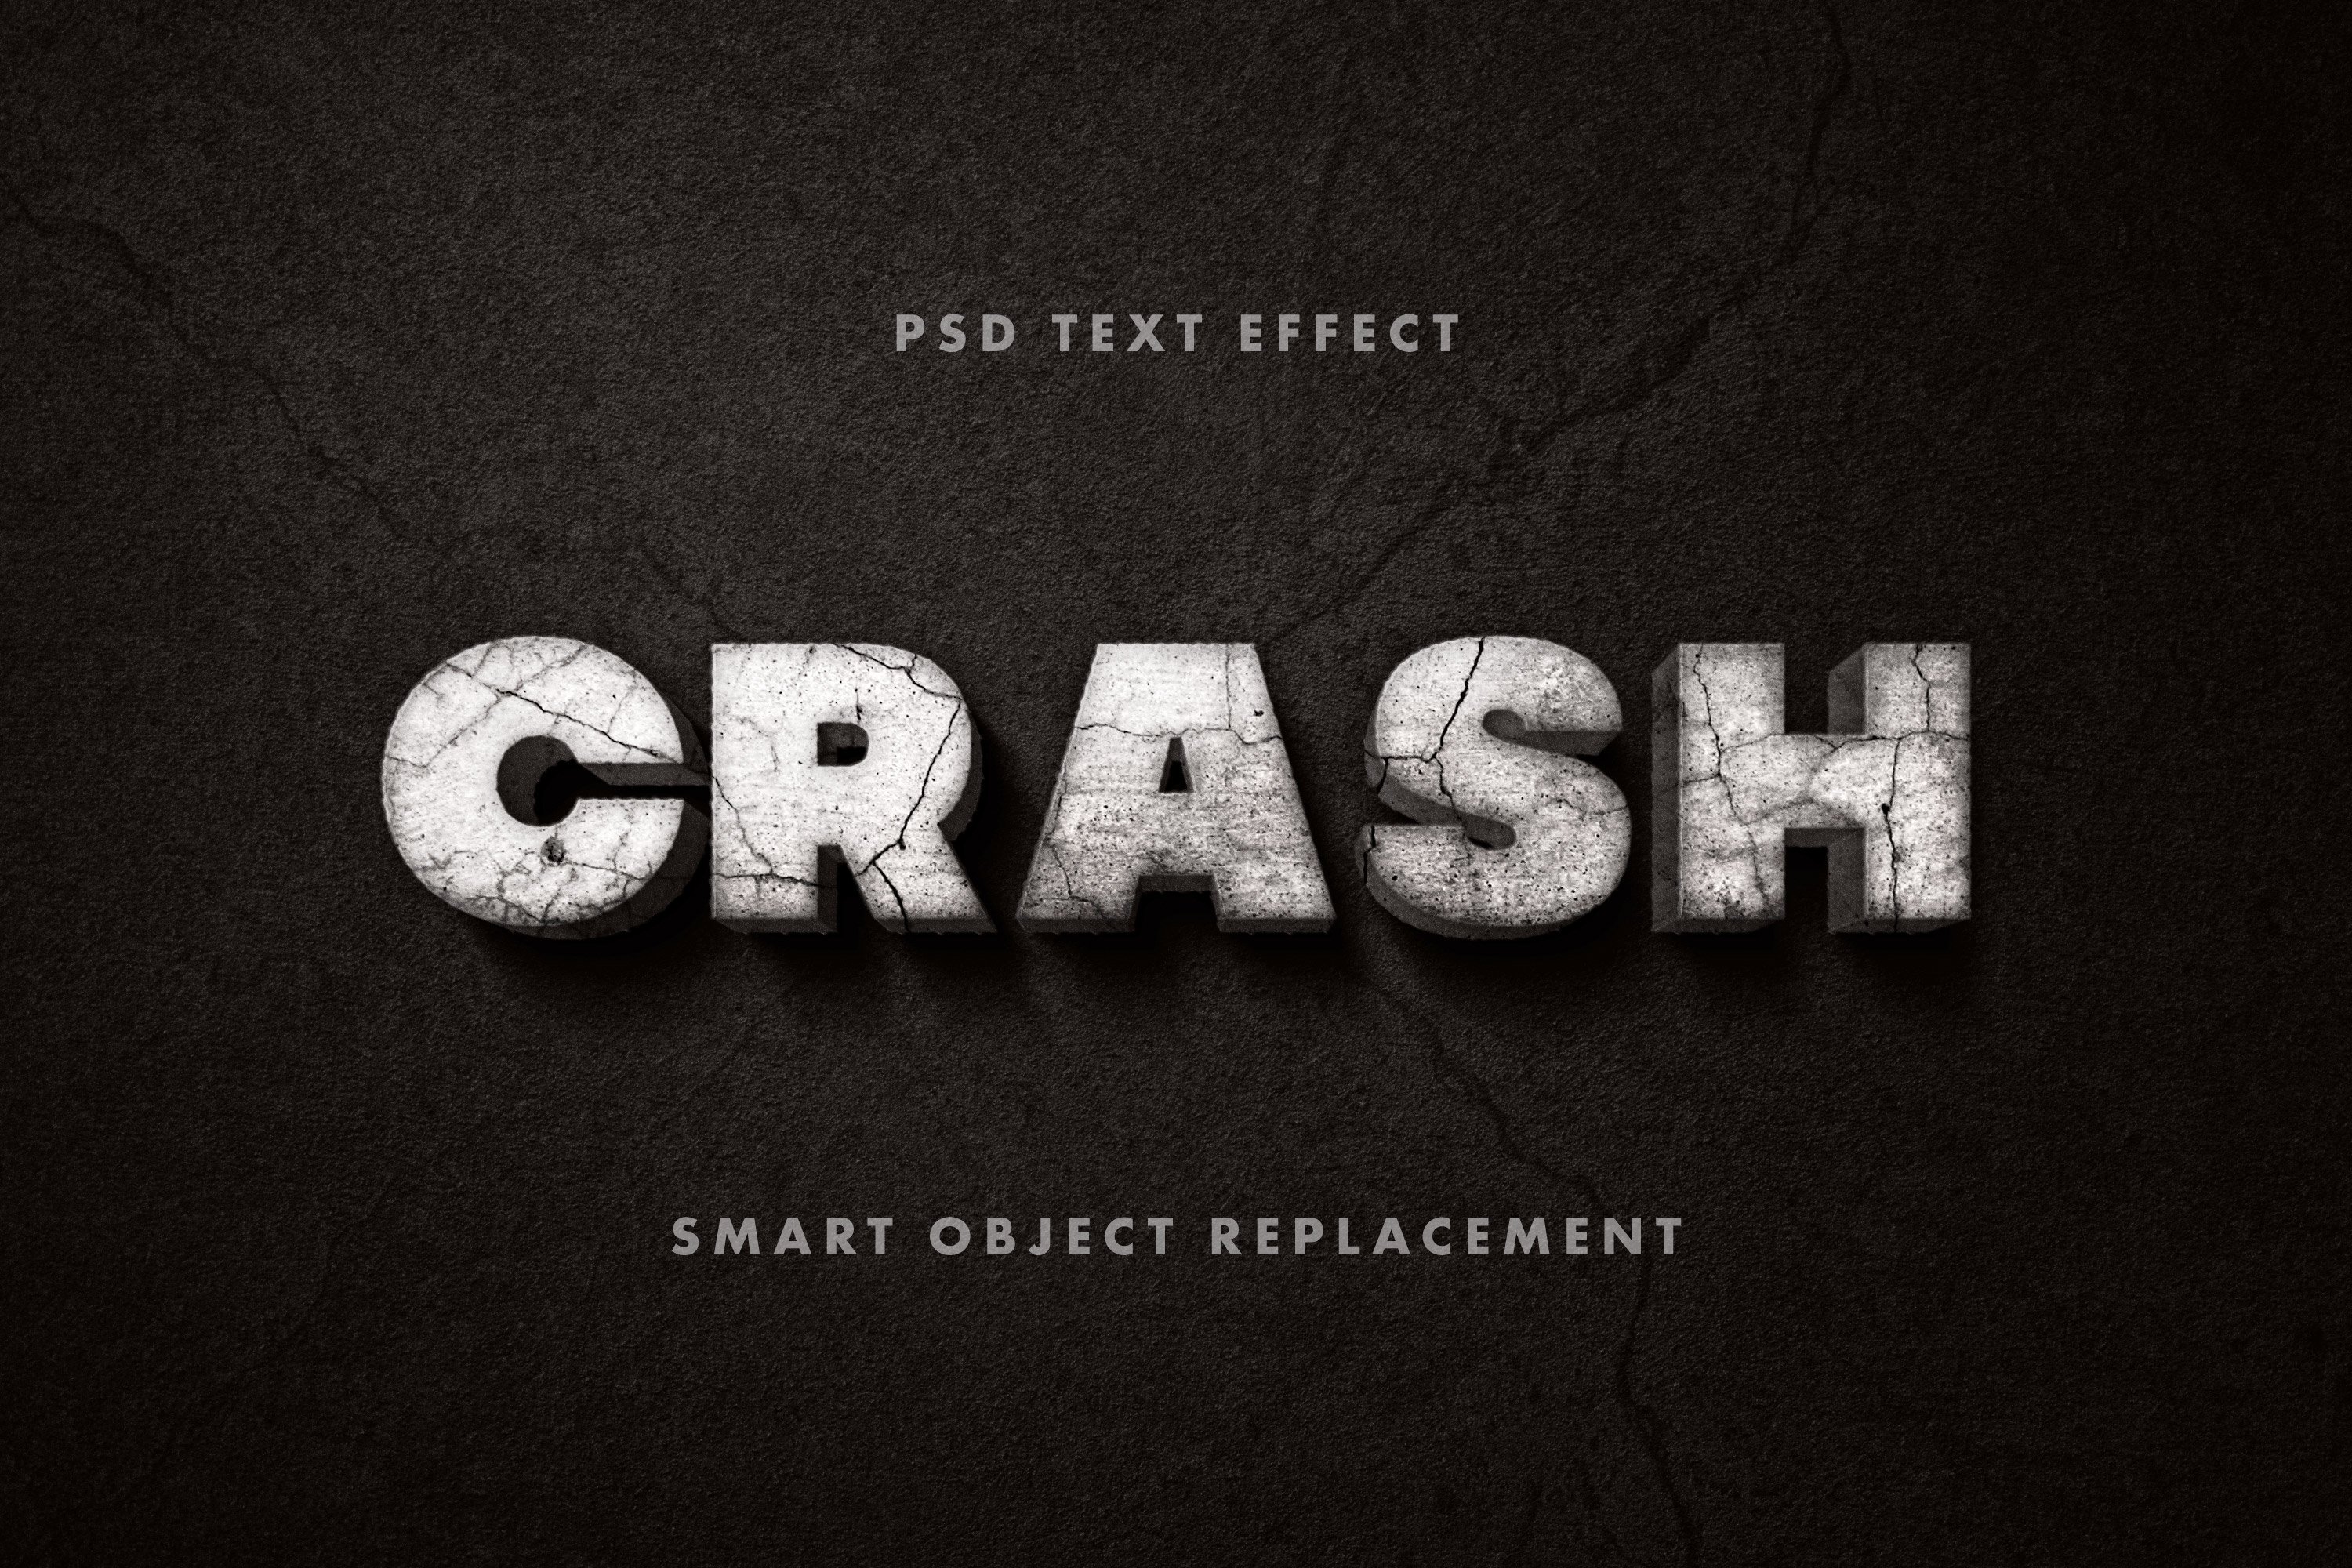 Crashed Text Effectcover image.